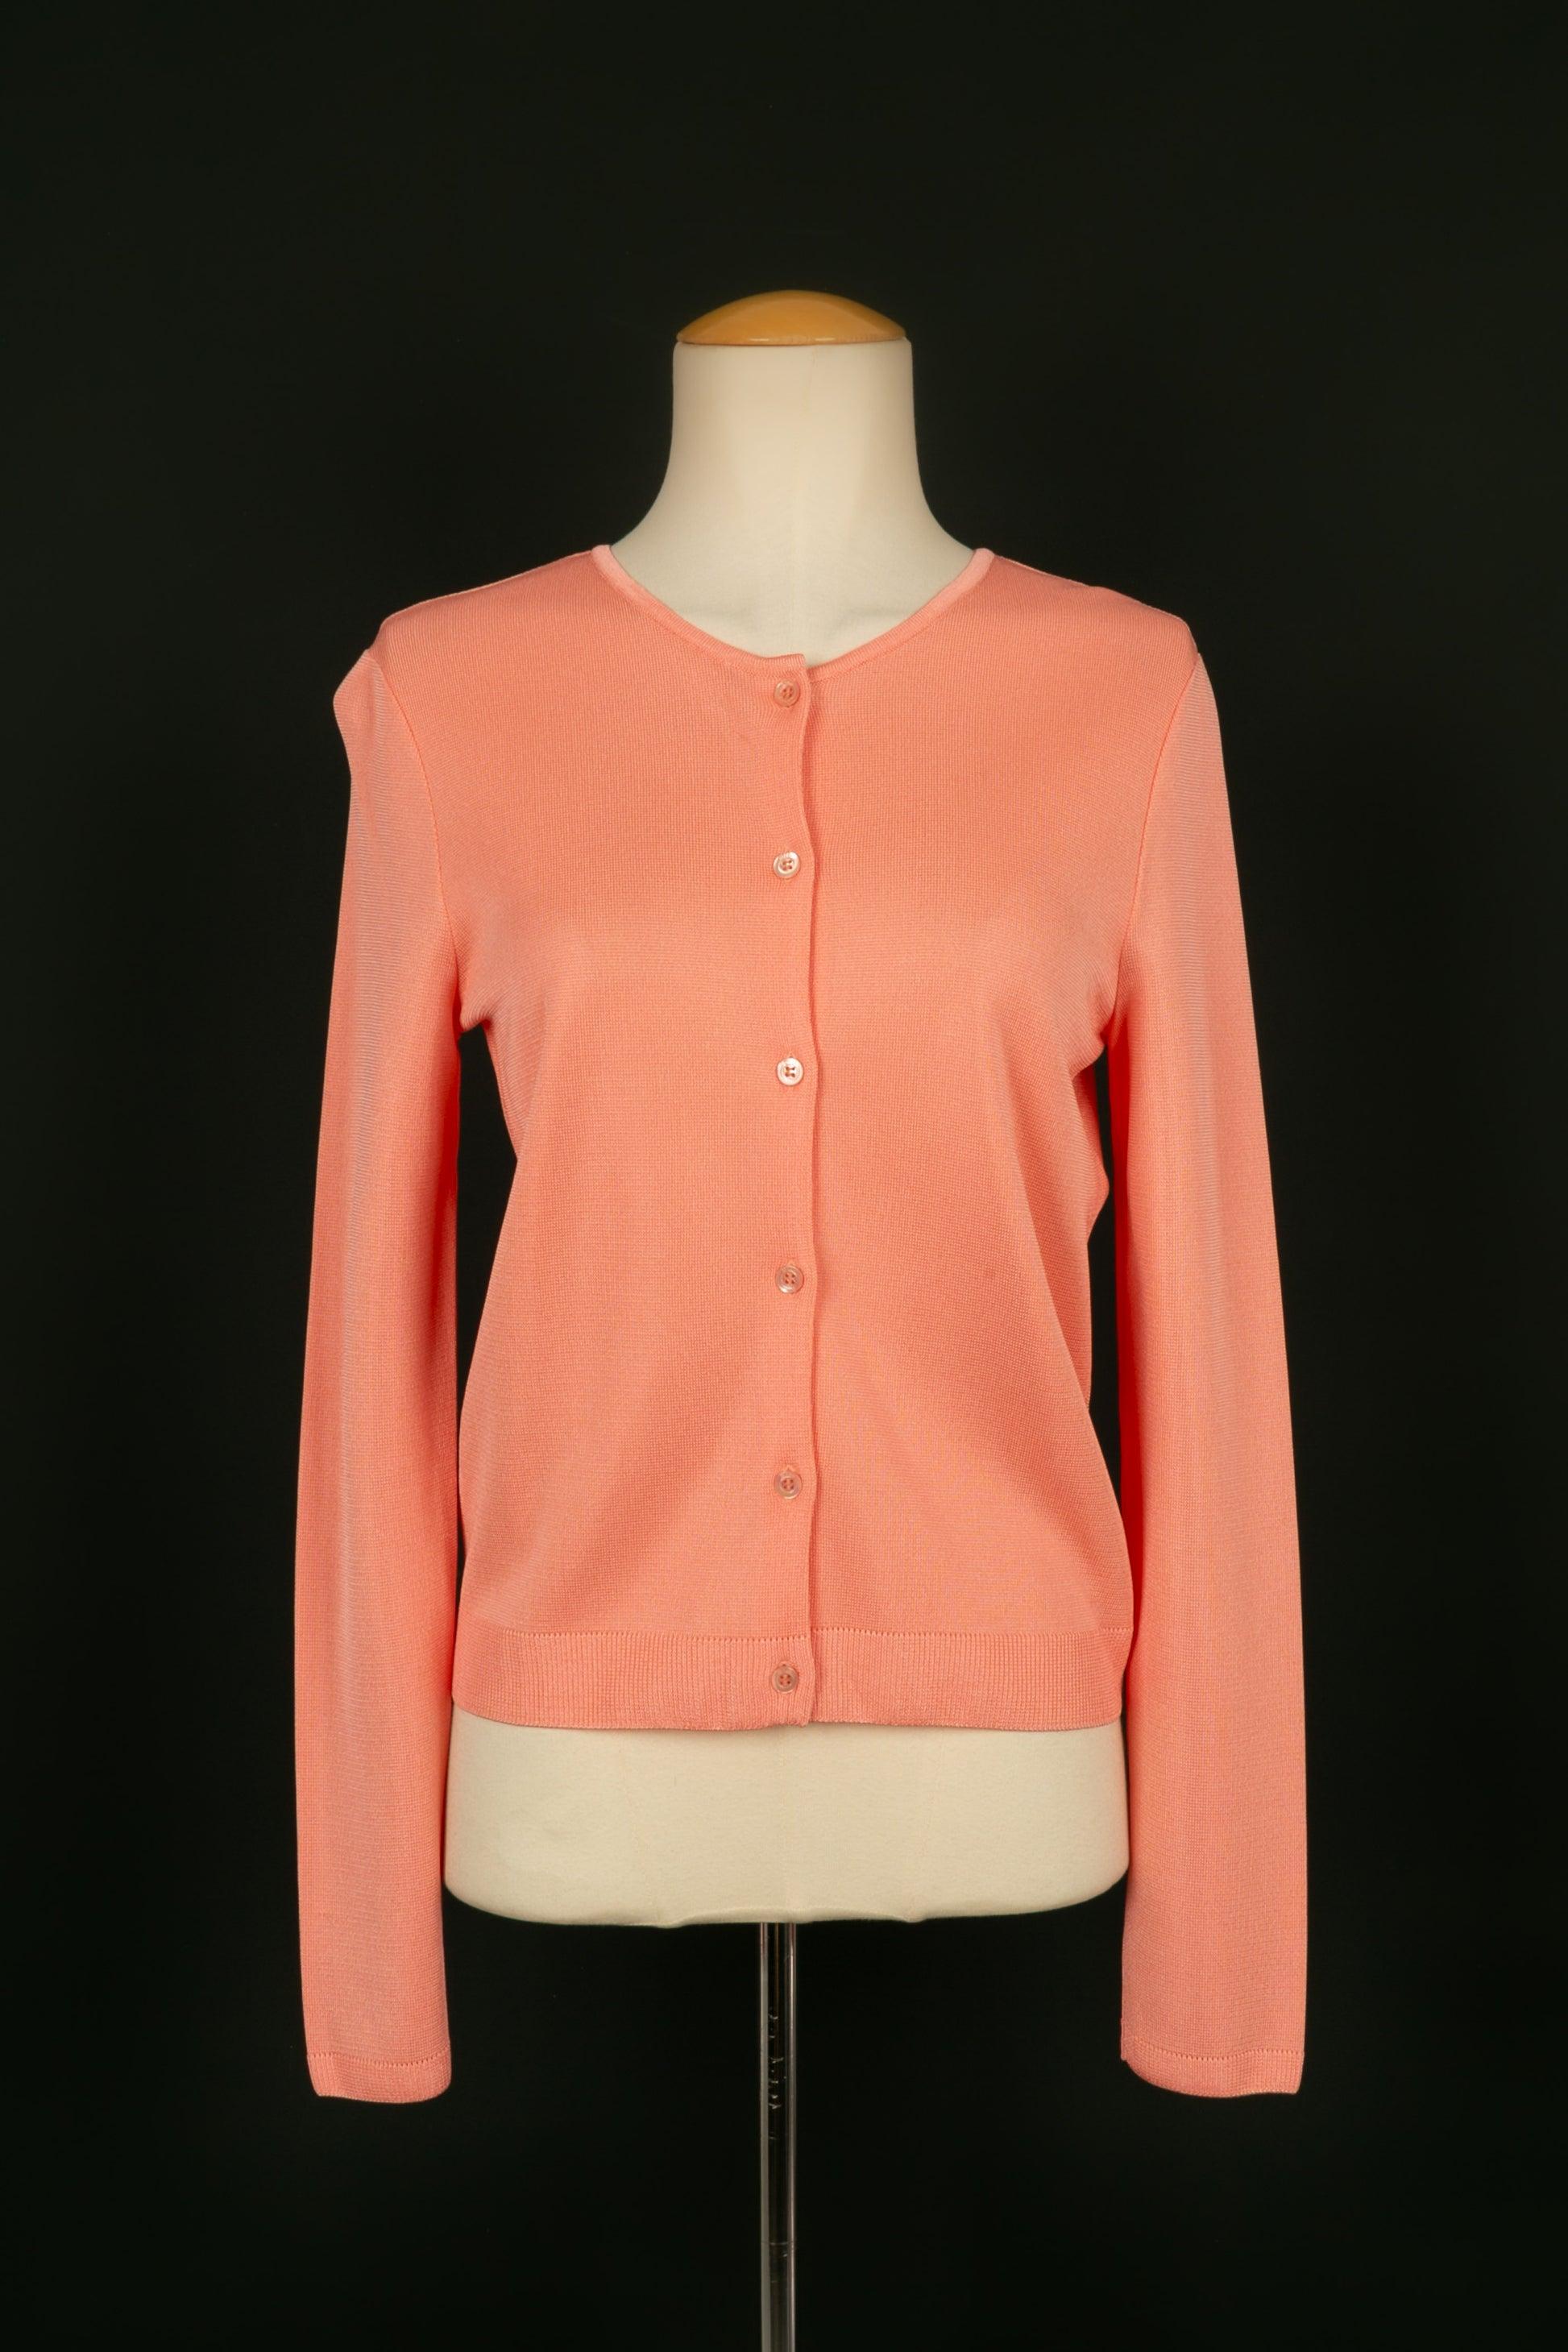 Dior - (Made in France) Viscose twin set composed of a cardigan and a sleeveless top in orangey pink tones. Size 36FR. Fall-Winter 2003 Collection.

Additional information:
Condition: Very good condition
Dimensions: Cardigan: Shoulder width: 41 cm -